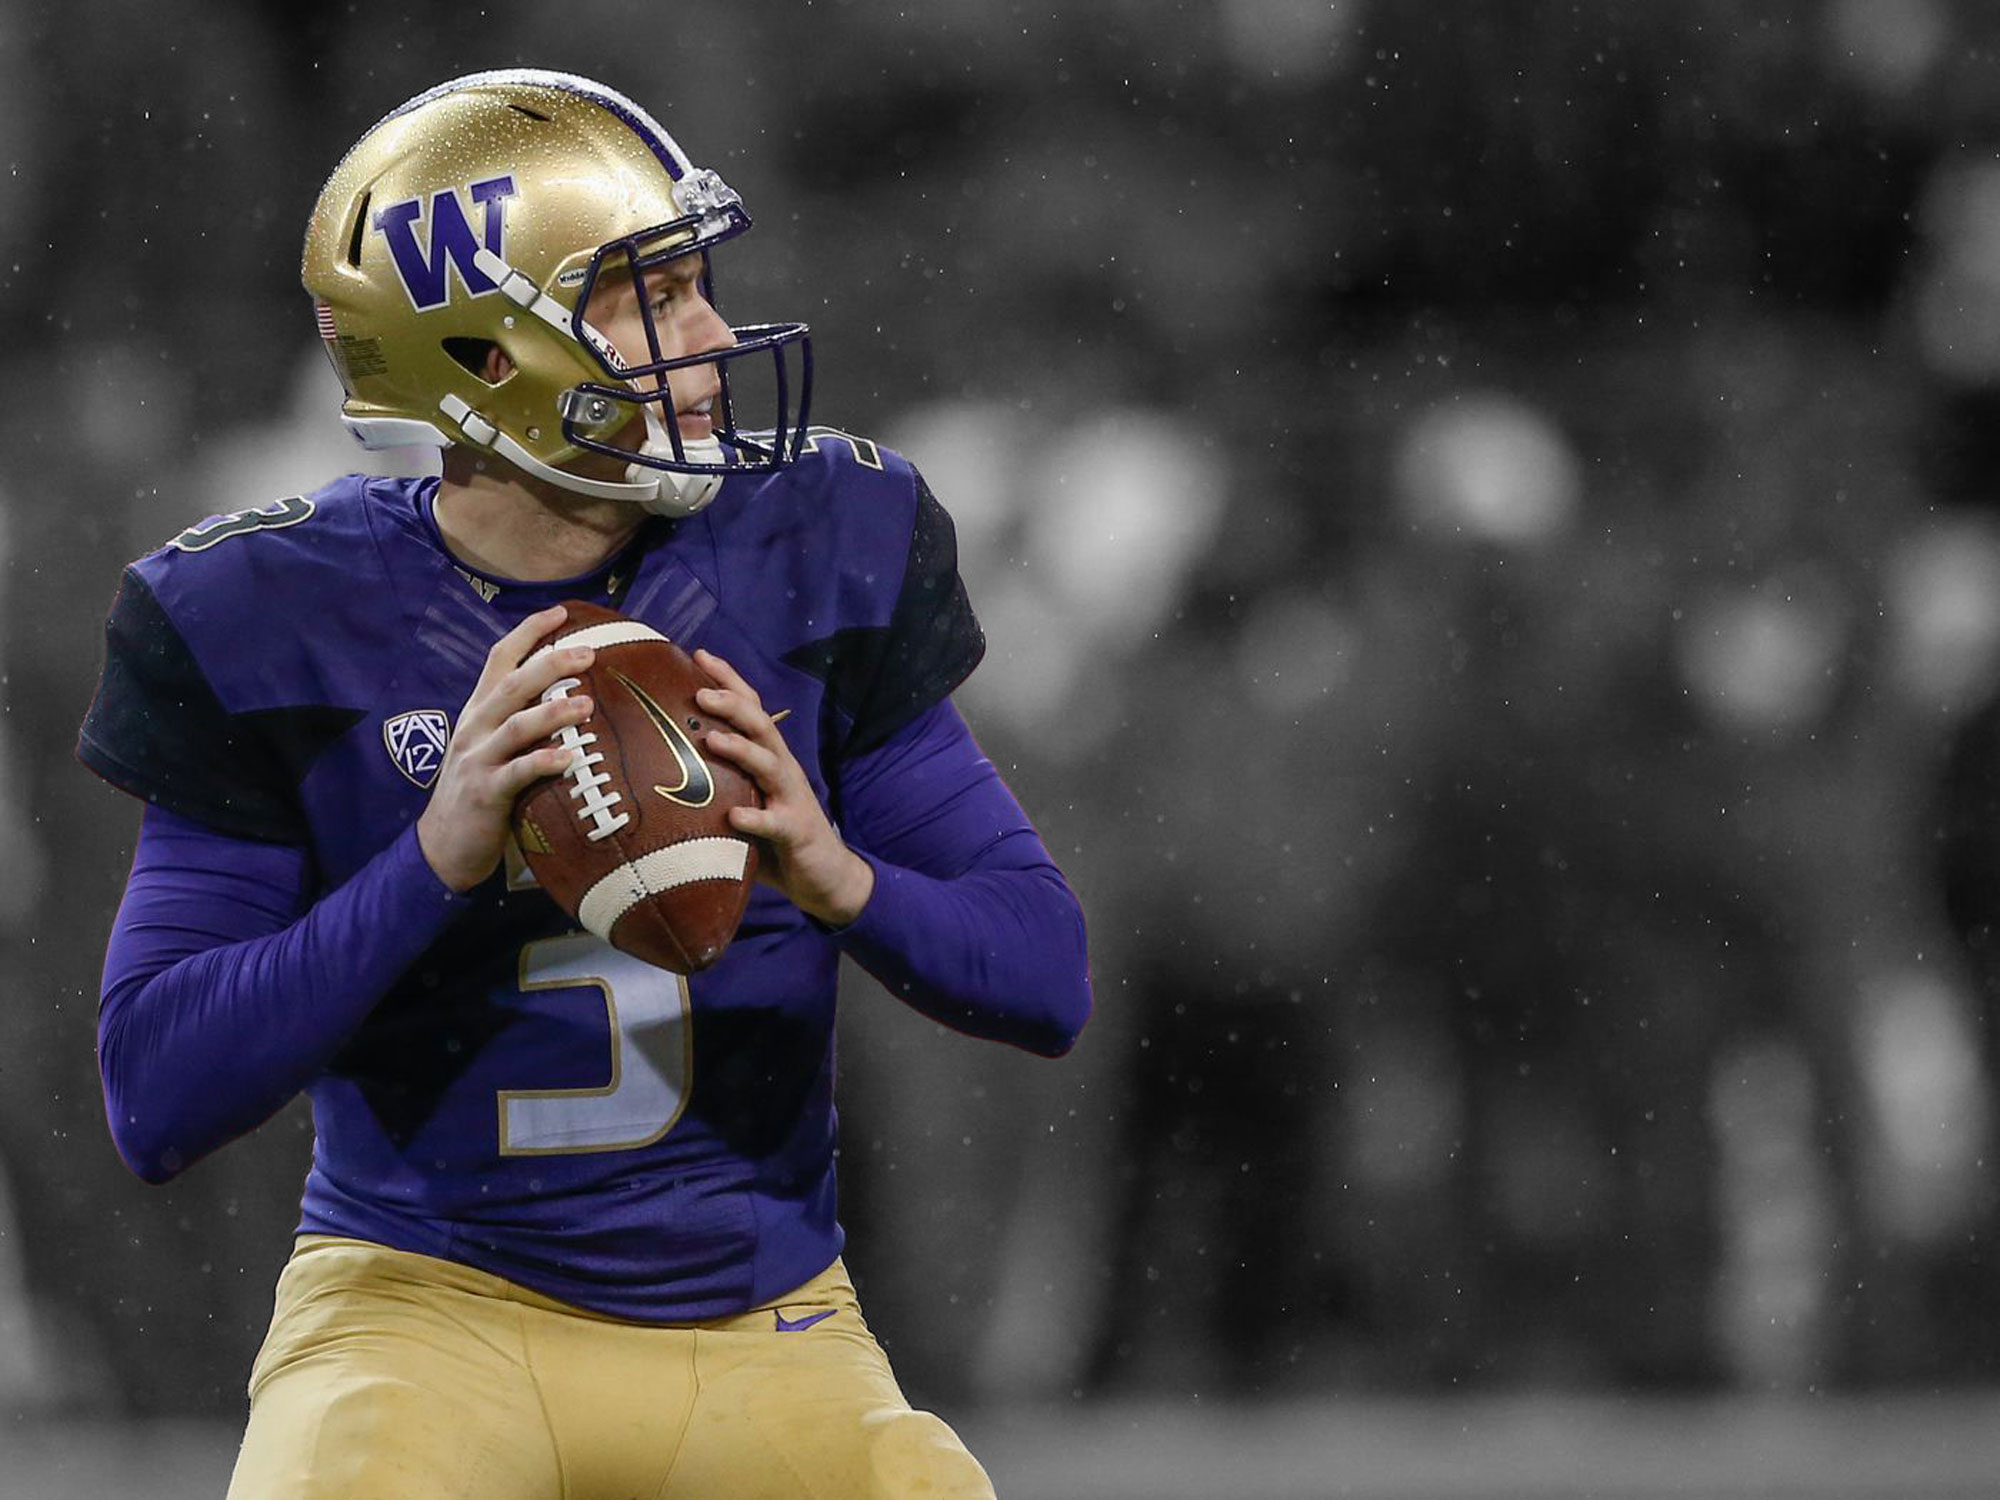 A man wearing a purple and gold uniform holding a football in the rain.